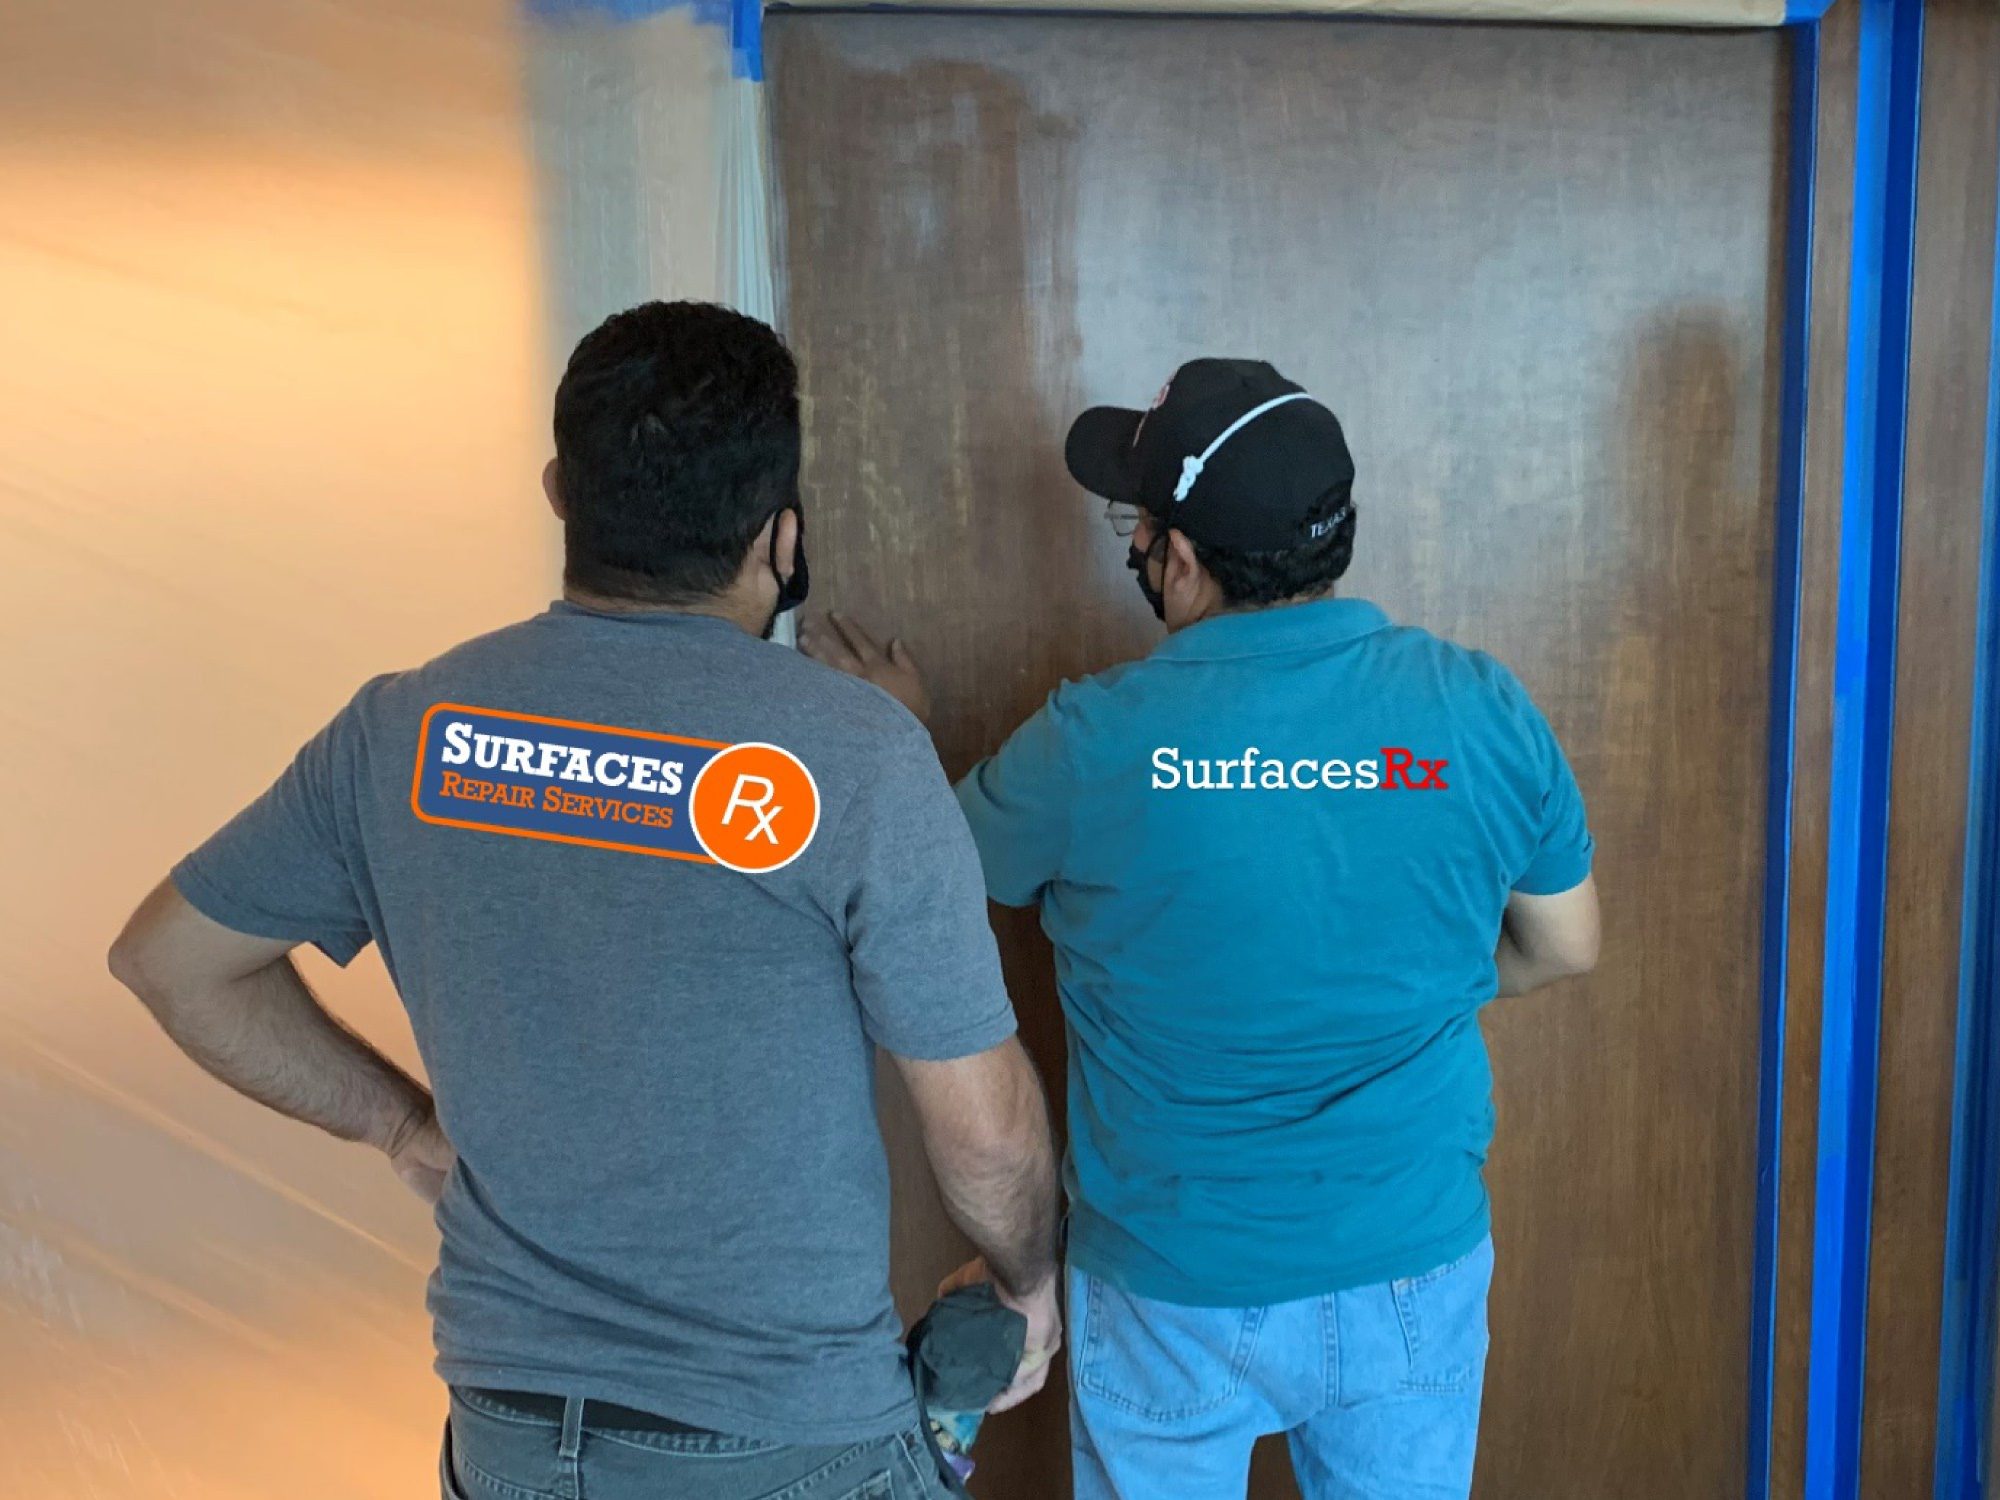 Surfaces Rx Applying Another Coat of Finish to wood Millwork in Dallas TX Home